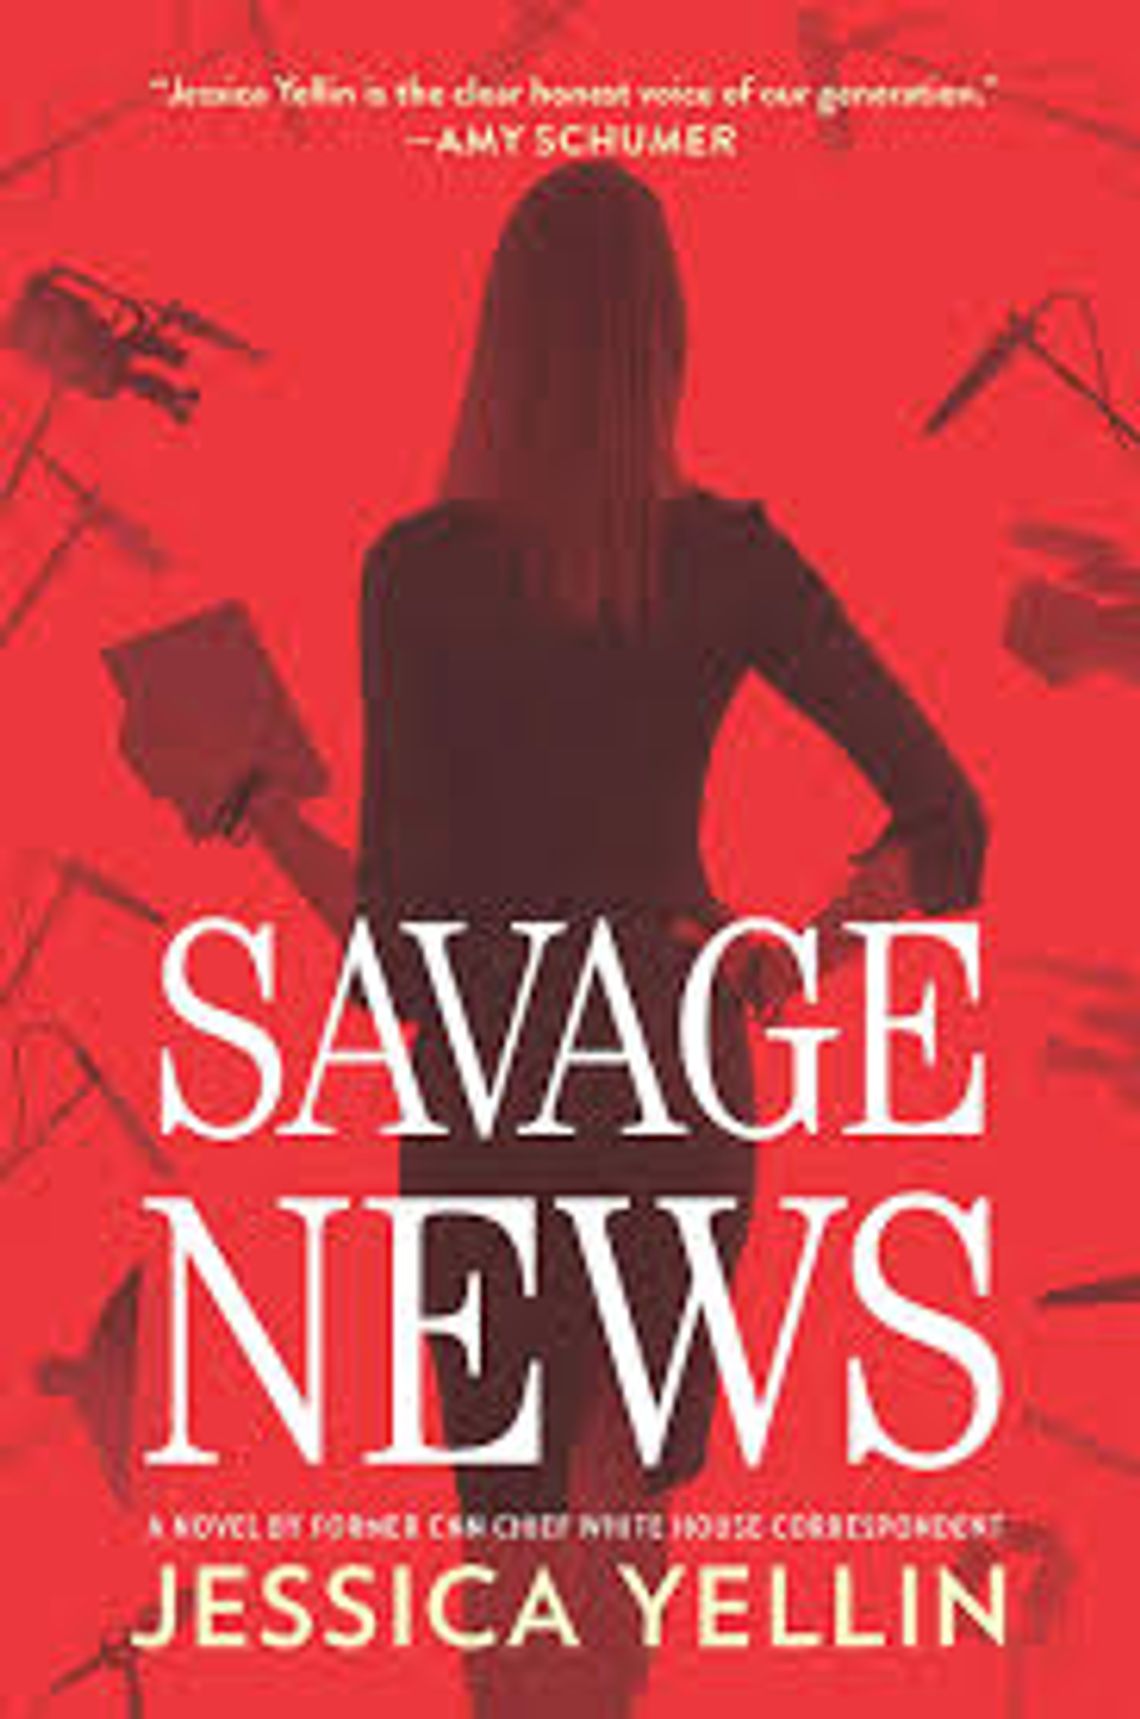 Book Review -- Savage News by Jessica Yellin